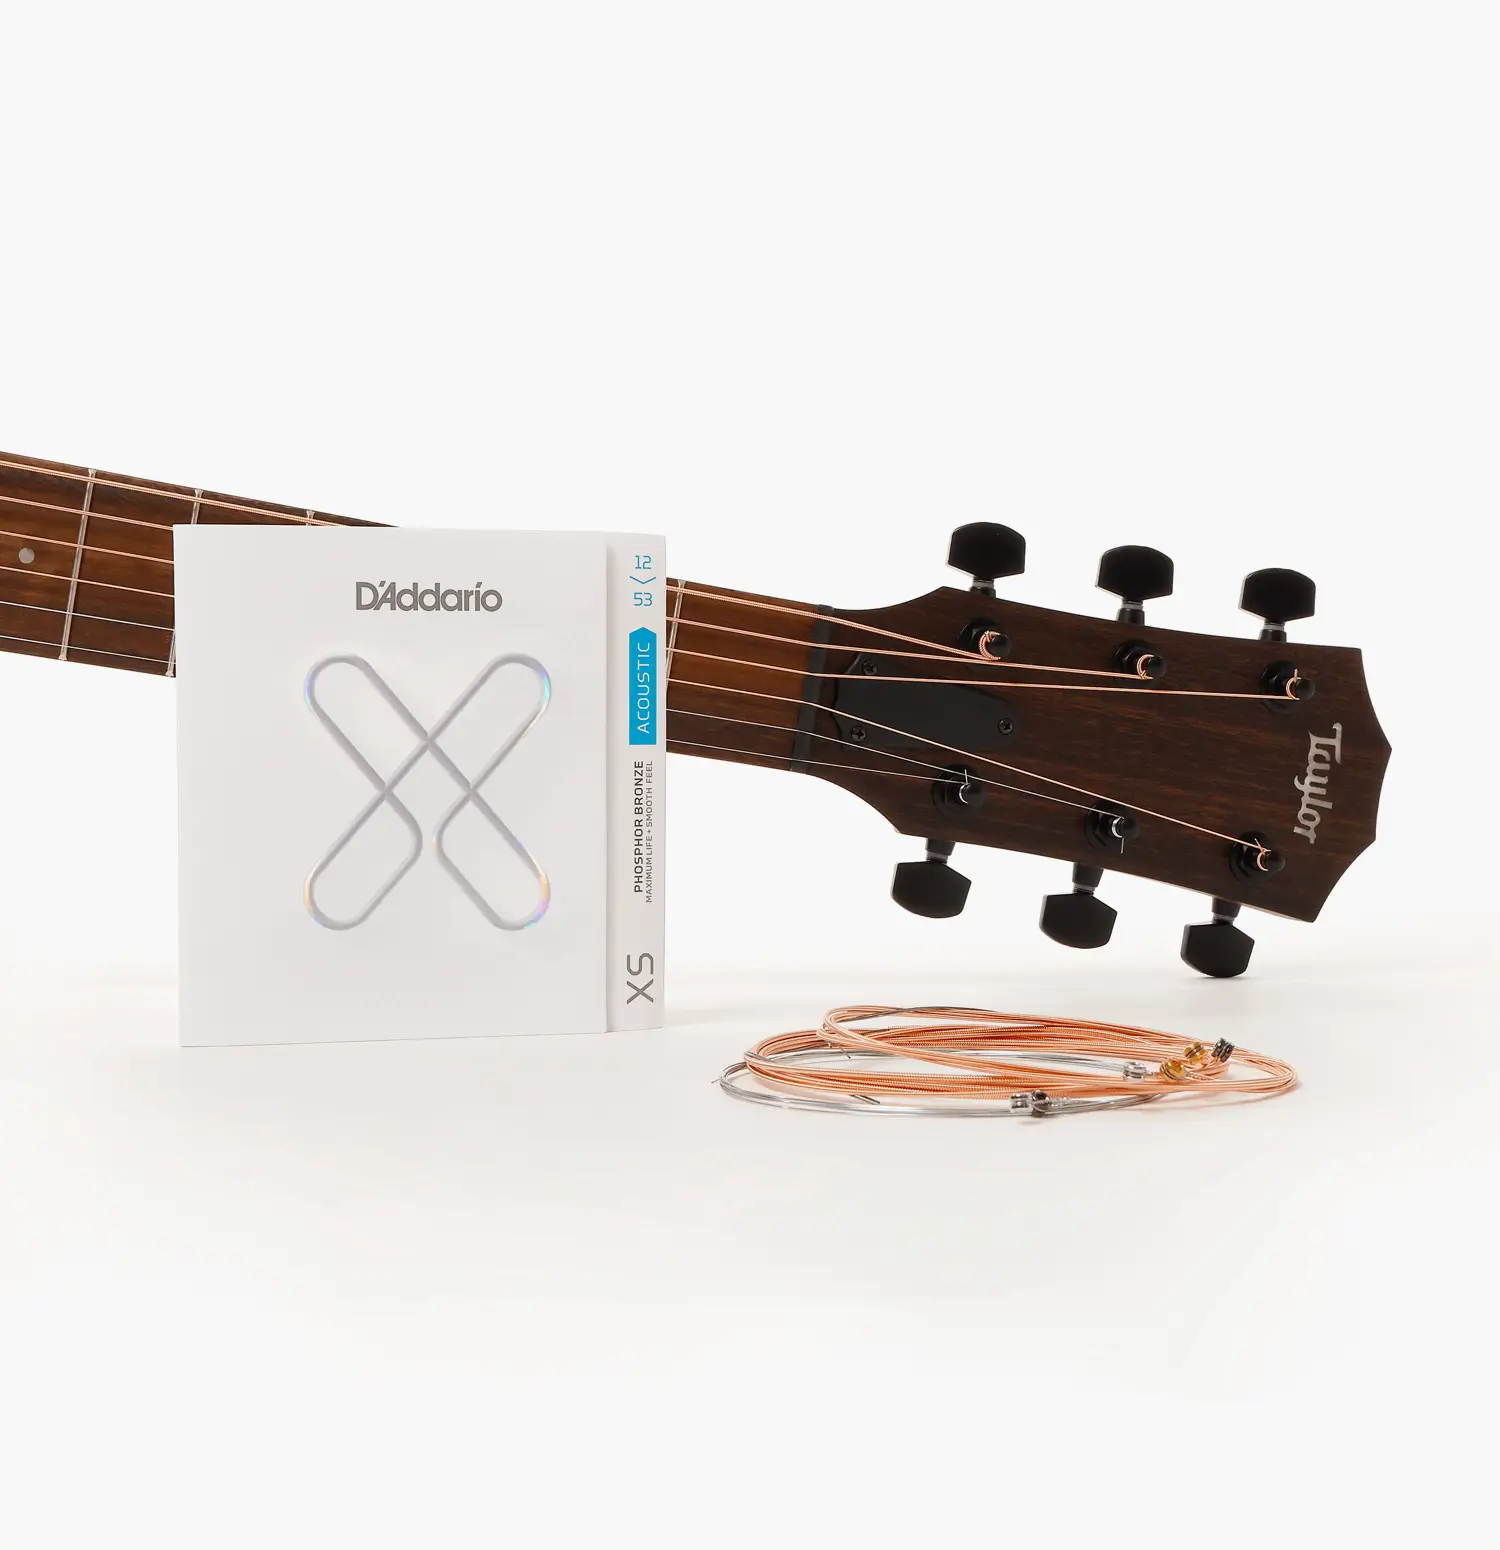 NEWS: Taylor Guitars Transitioning to D’Addario Coated XS Phosphor Bronze Strings